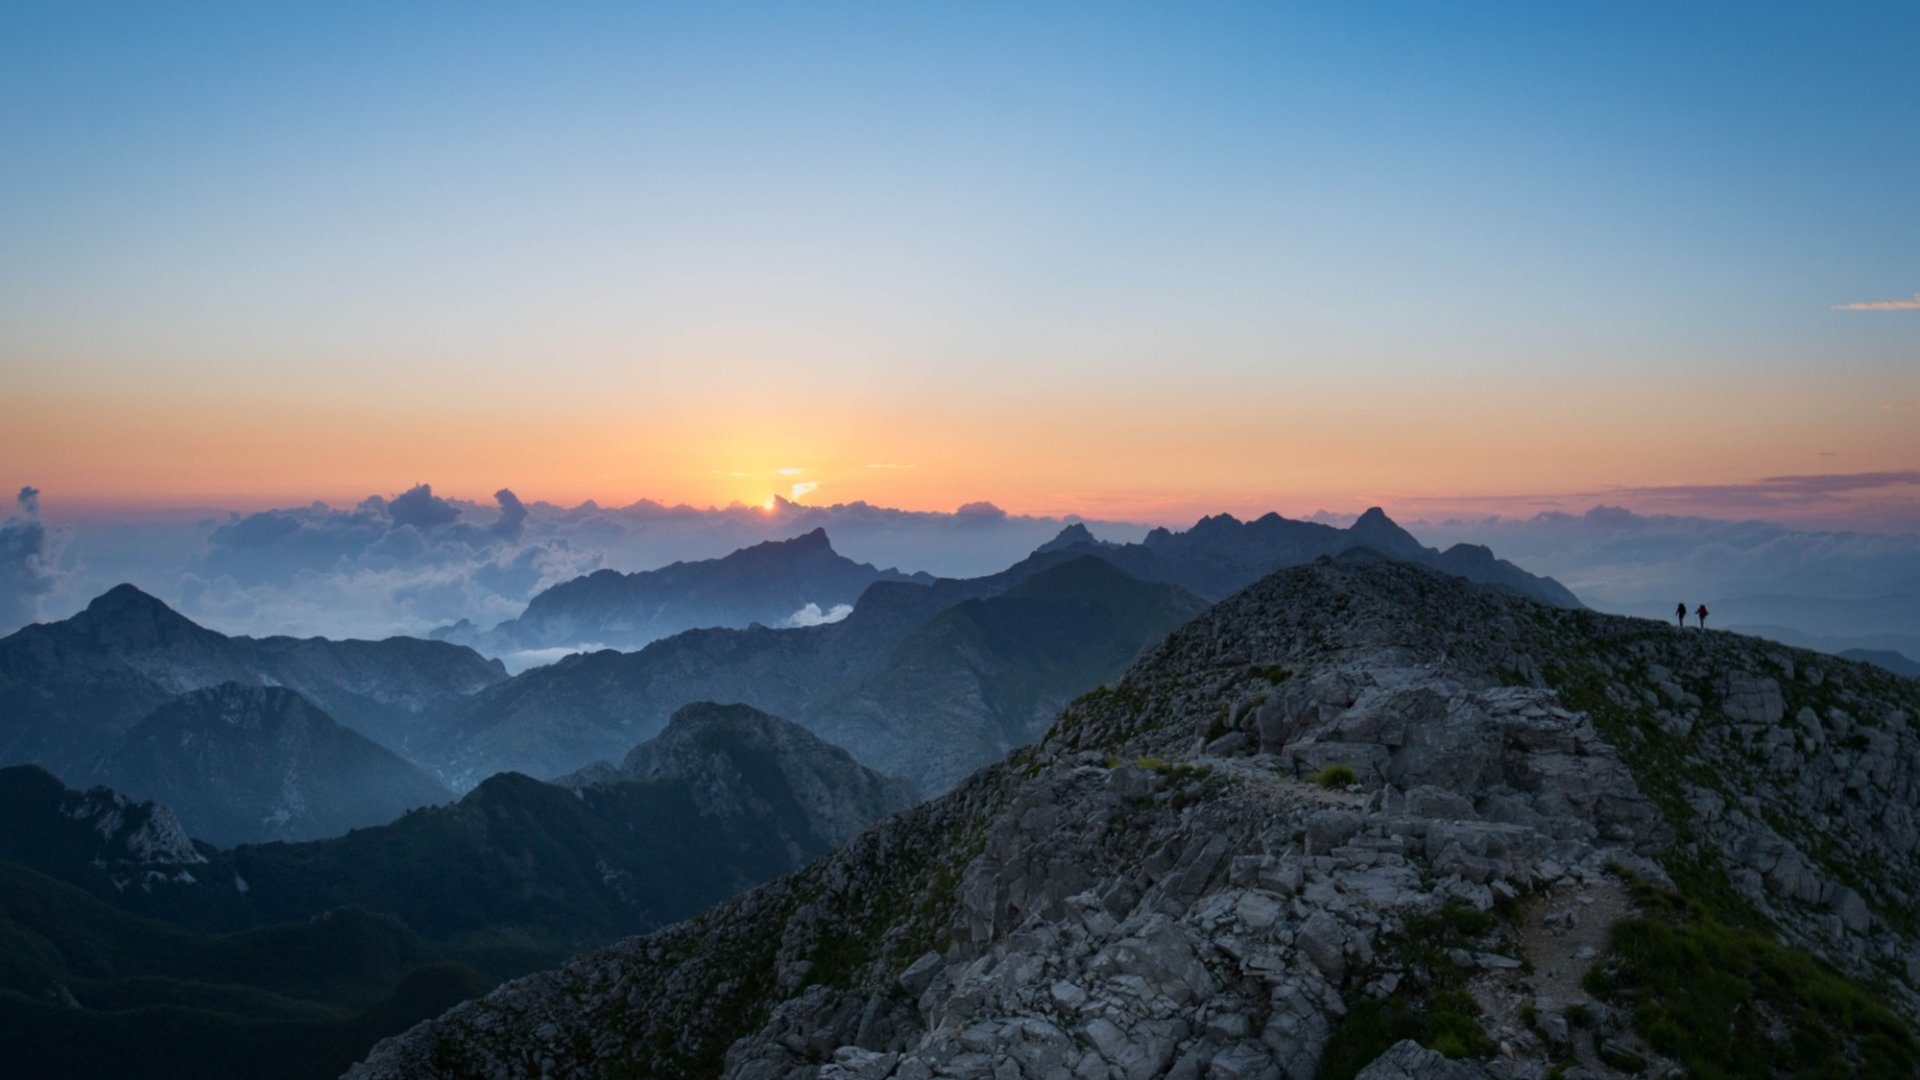 Peaks of the Apuan Alps at sunset